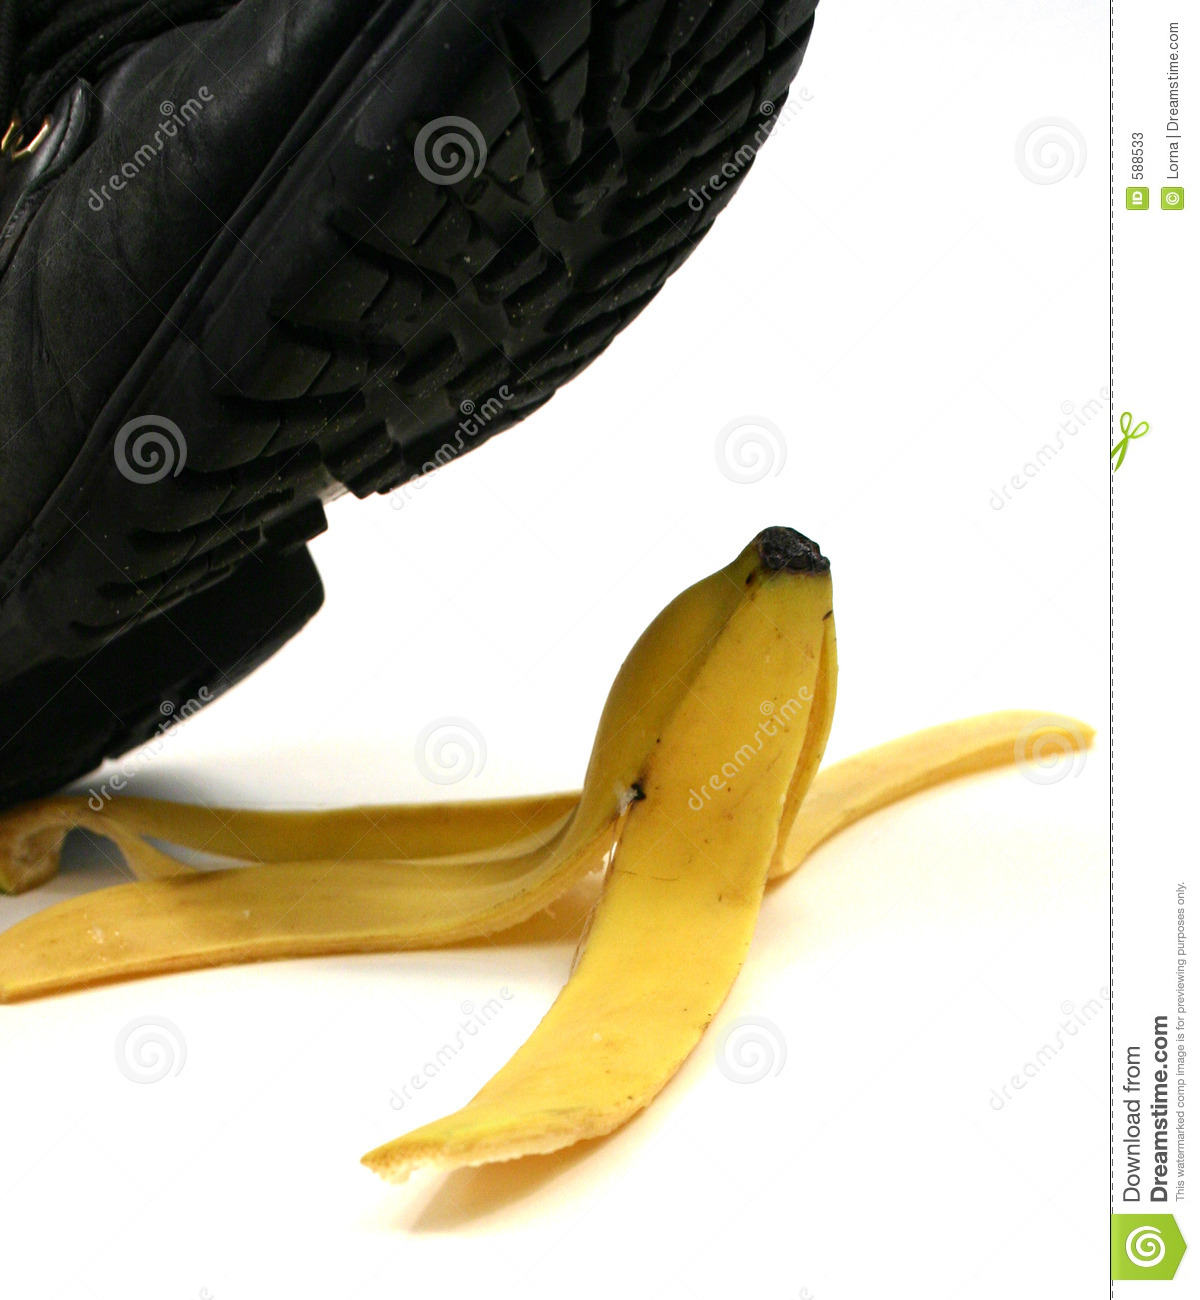 Foot Shoe About To Slip On Banana Peel And Have An Accident